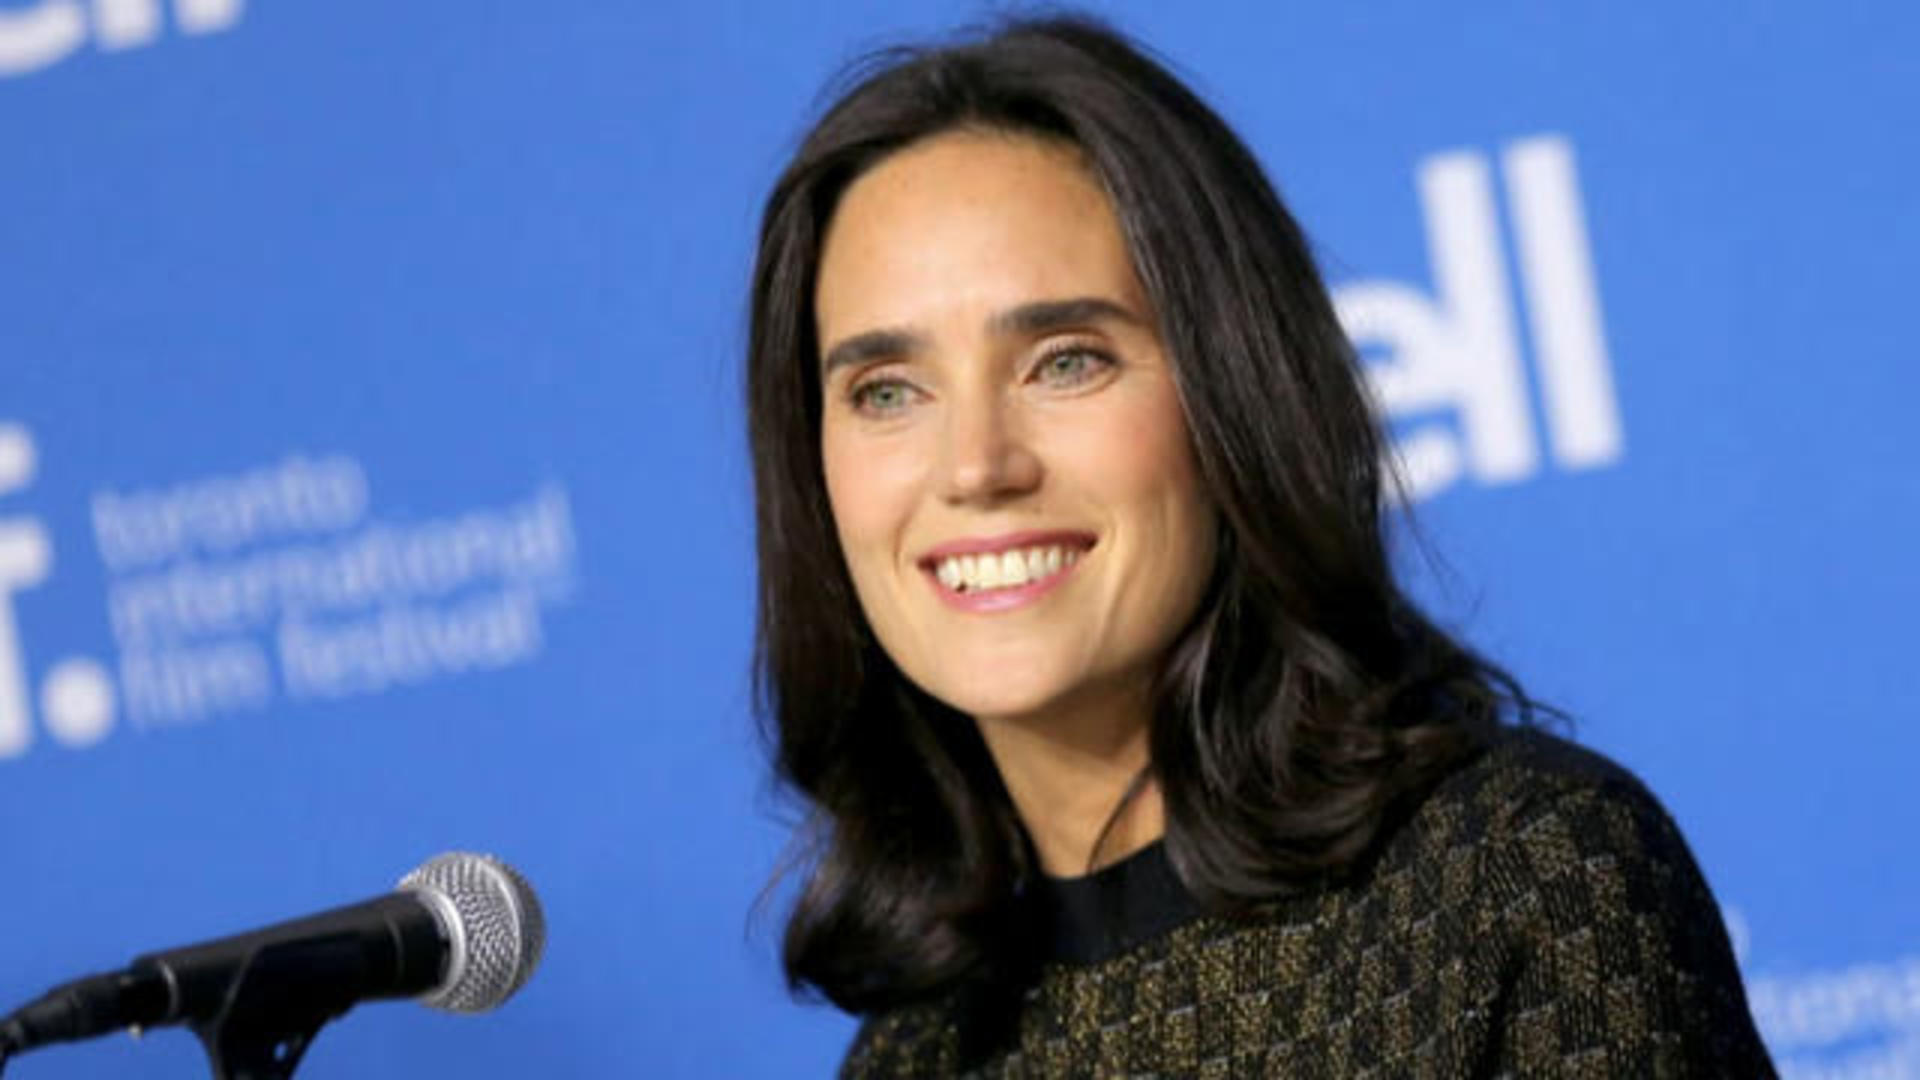 Jennifer Connelly Through The Years in 60 seconds 